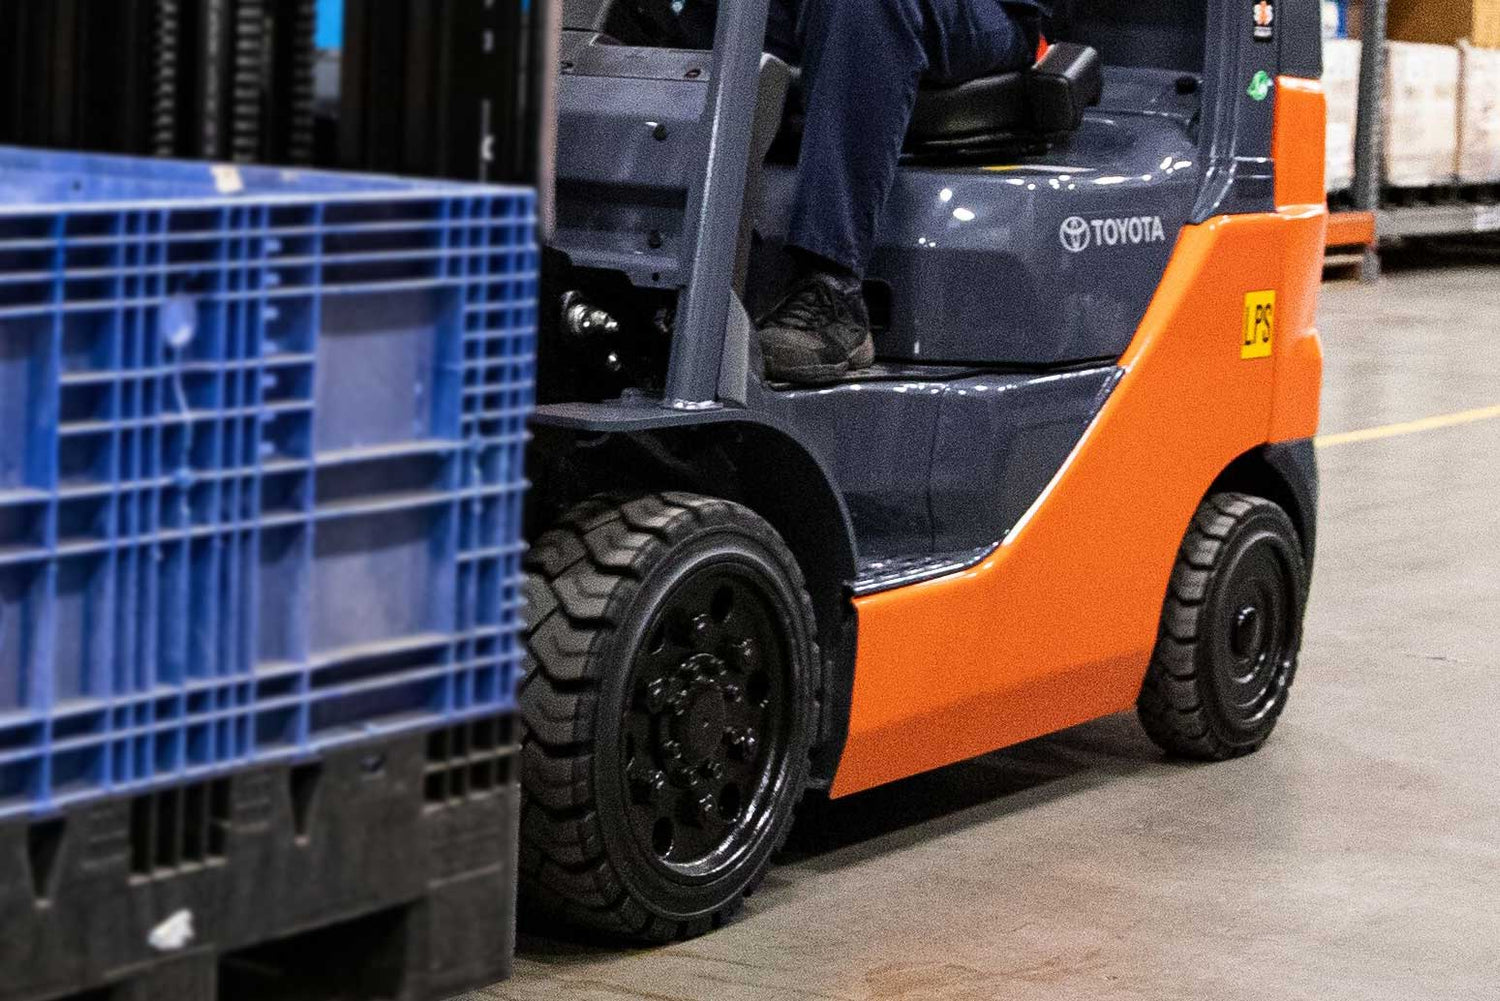 Why should I replace my forklift's tires?